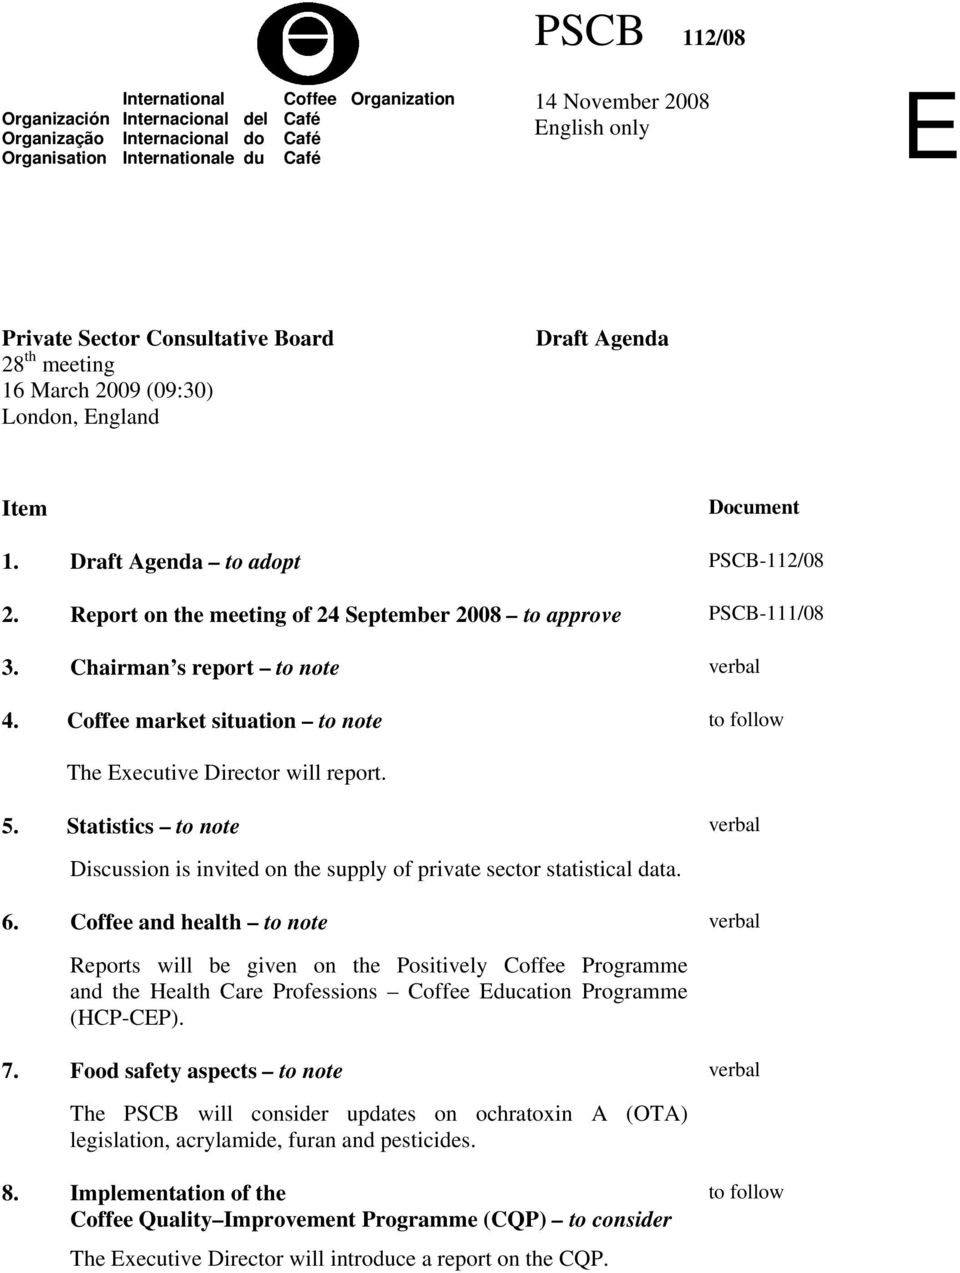 Report on the meeting of 24 September 2008 to approve PSCB-111/08 3. Chairman s report to note 4. Coffee market situation to note to follow The Executive Director will report. 5.